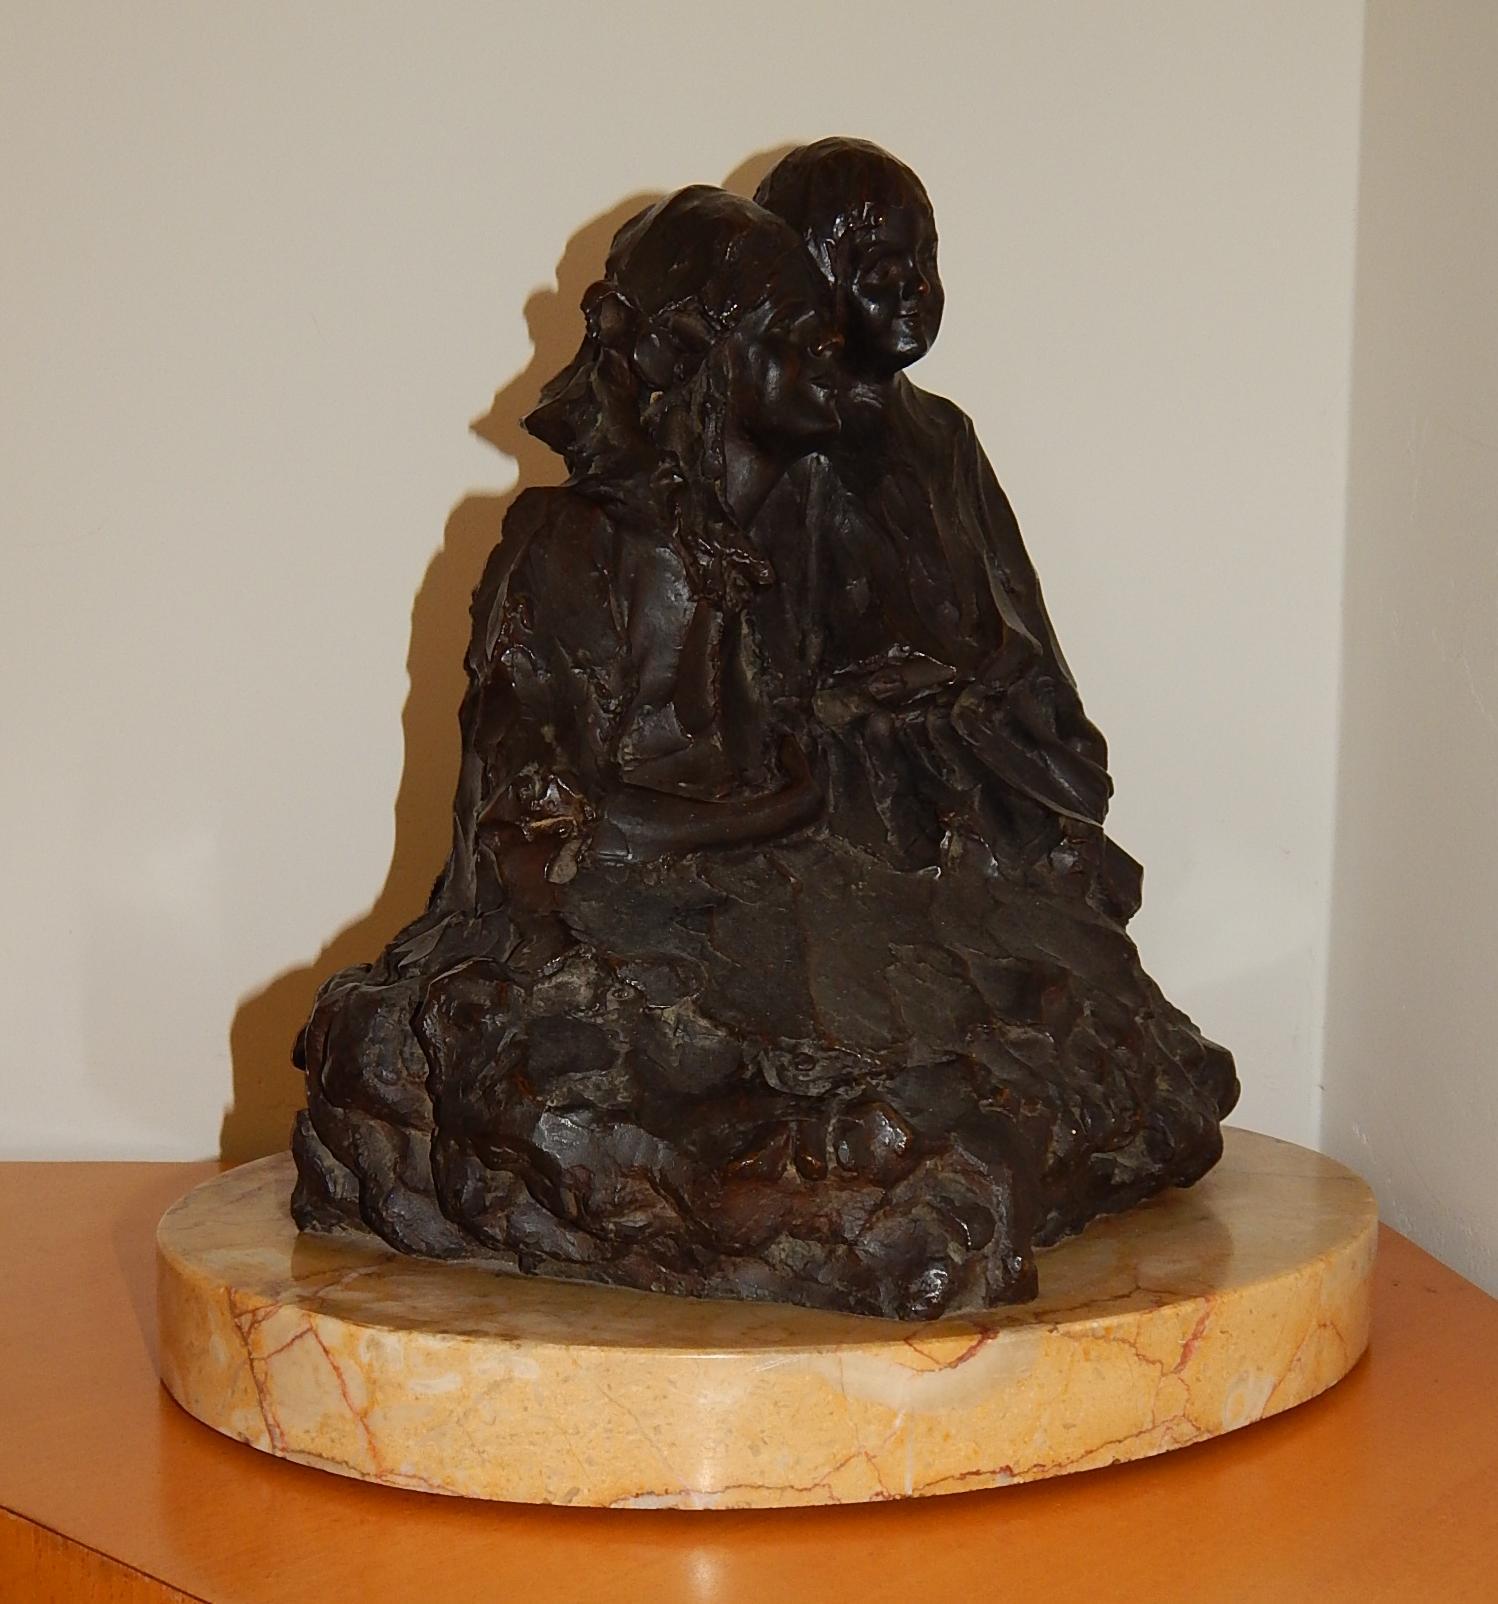 Frank Vittor (1888-1966) important bronze of mother and child.
Signed by the artist “F. Vittor” and dated 1915. Also bears the foundry mark.
Measures 12 1/2